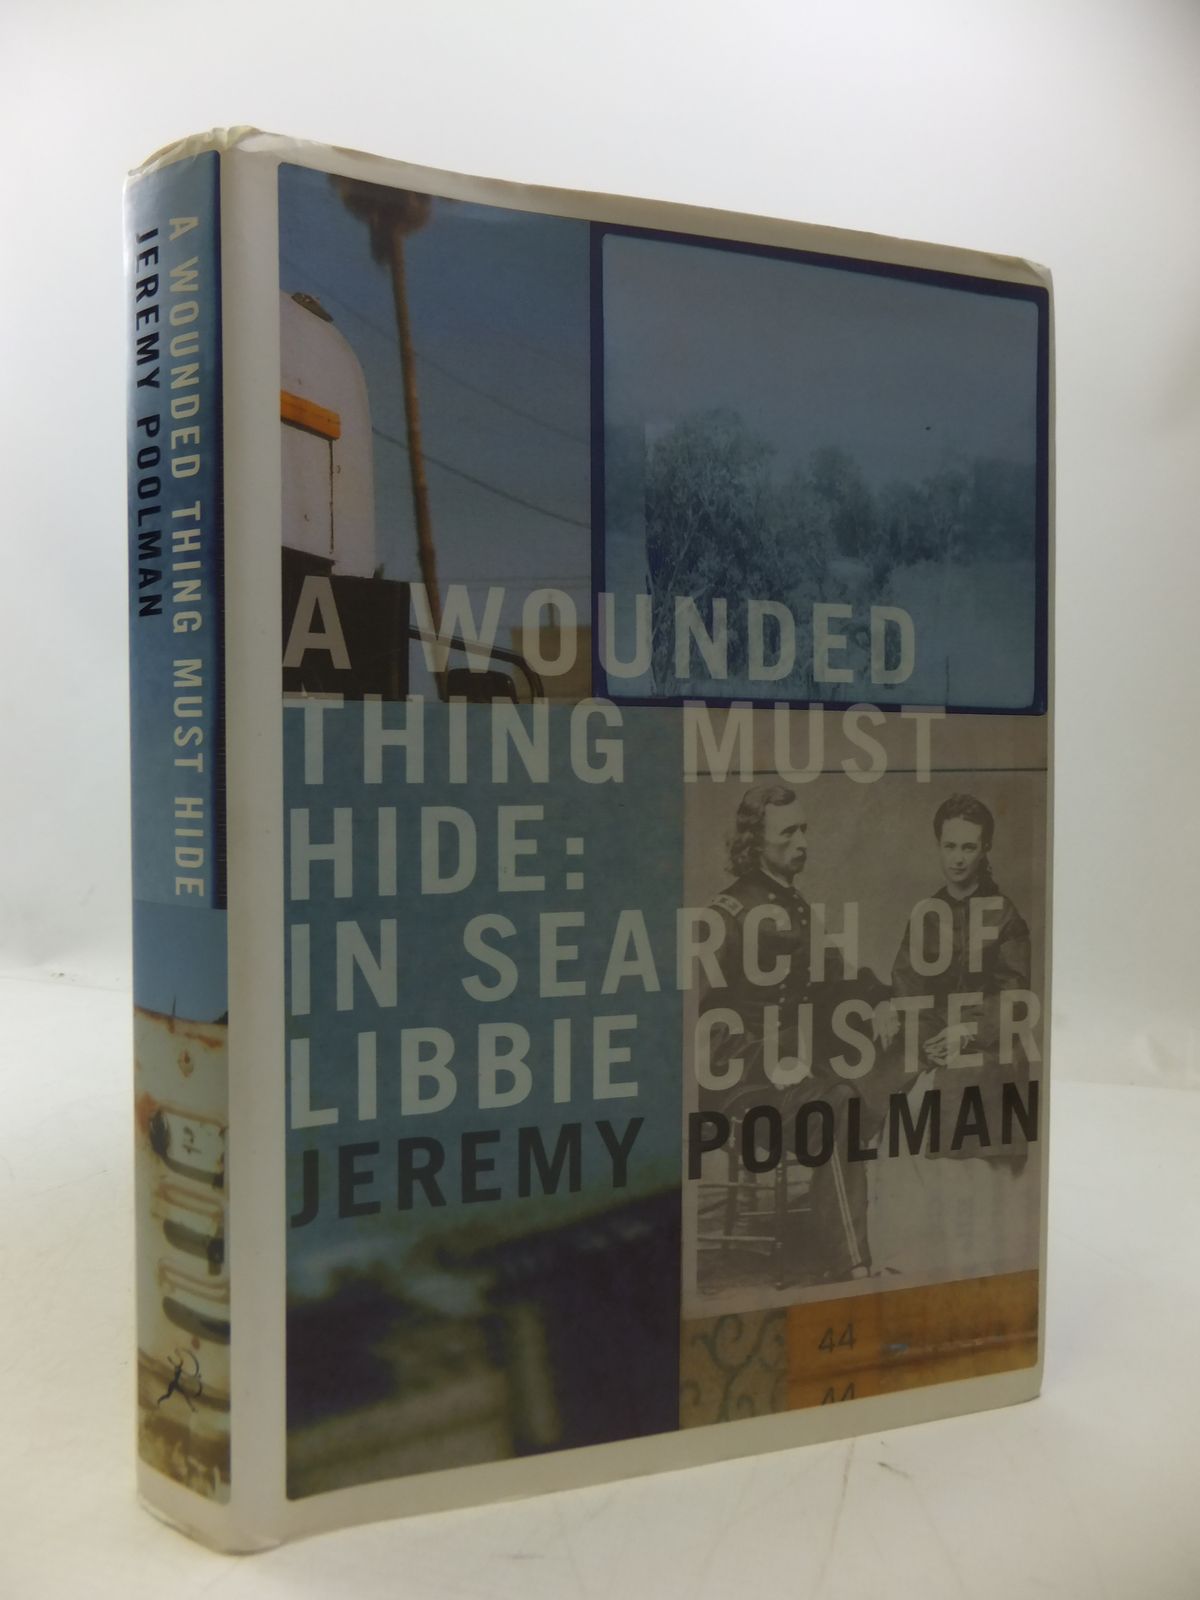 Photo of A WOUNDED THING MUST HIDE: IN SEARCH OF LIBBIE CUSTER written by Poolman, Jeremy published by Bloomsbury (STOCK CODE: 1807992)  for sale by Stella & Rose's Books